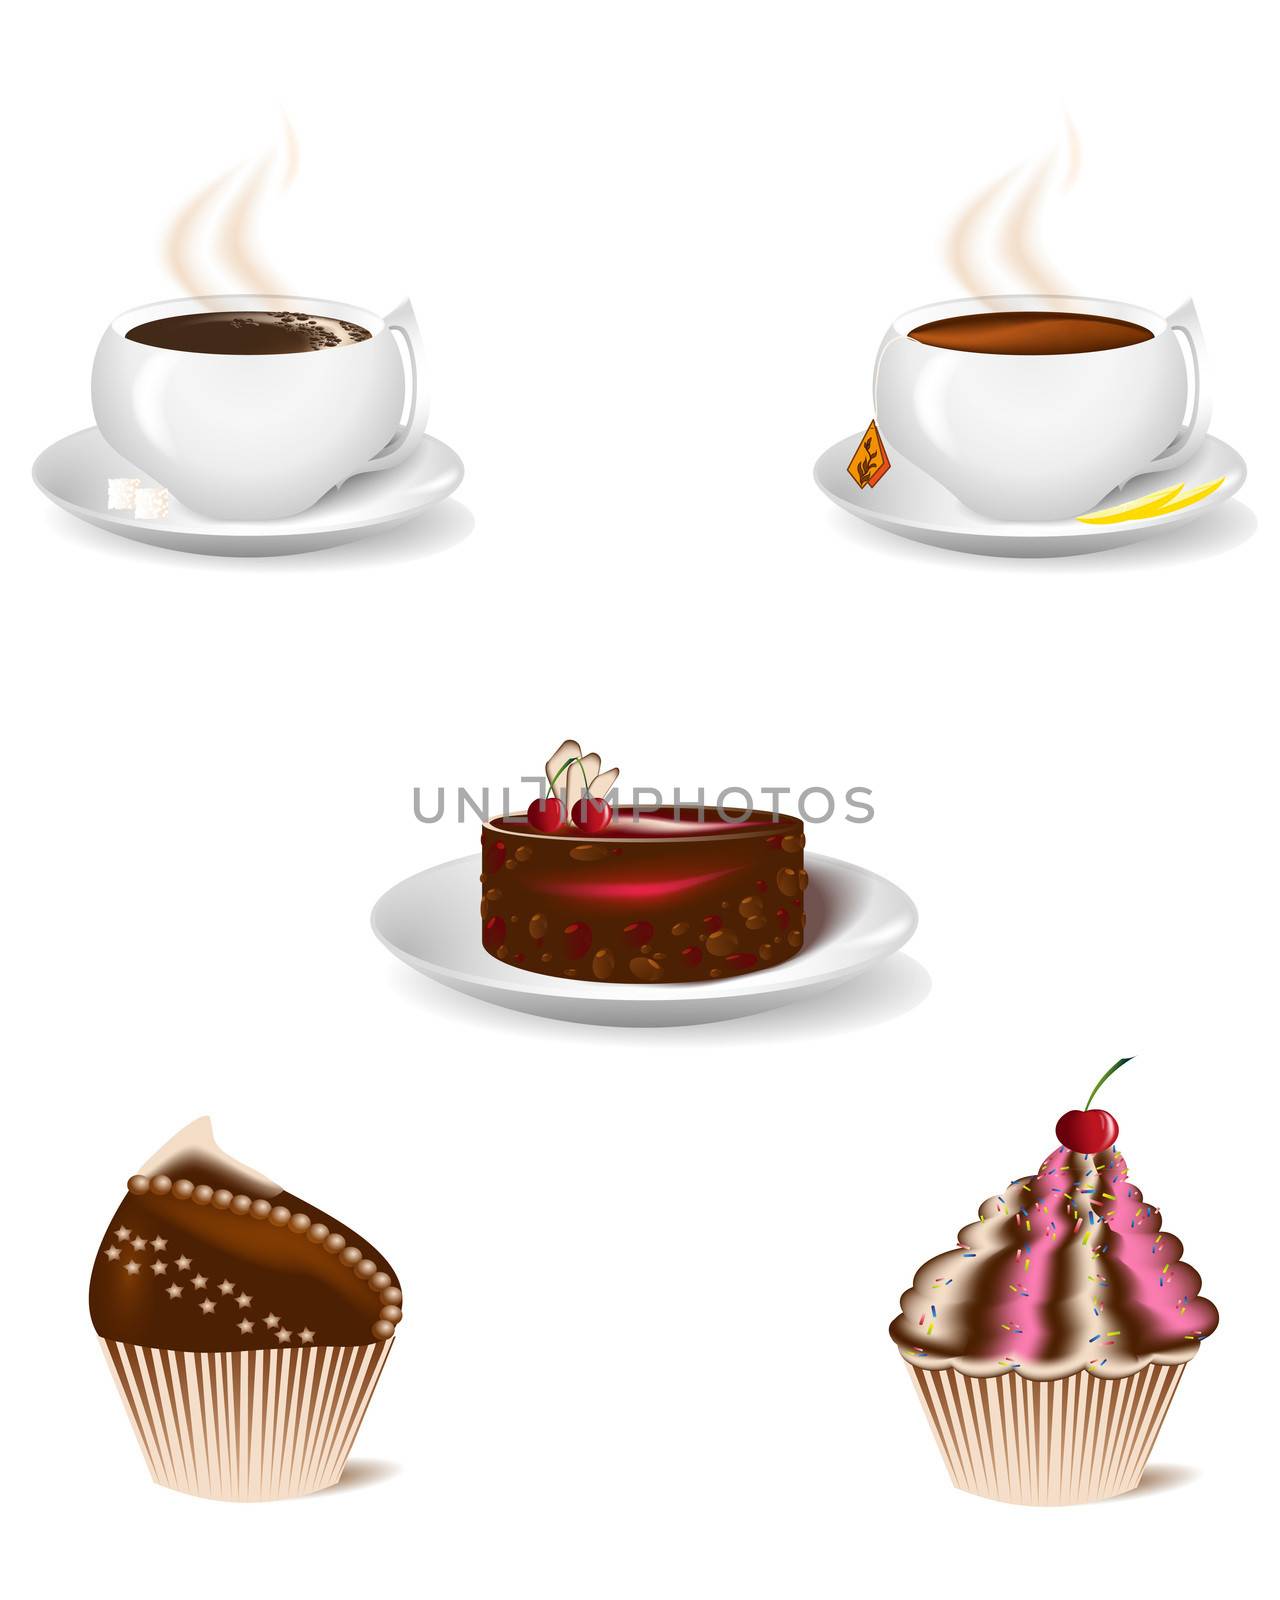 cup of coffee and   dessert cakes by natalinka7626